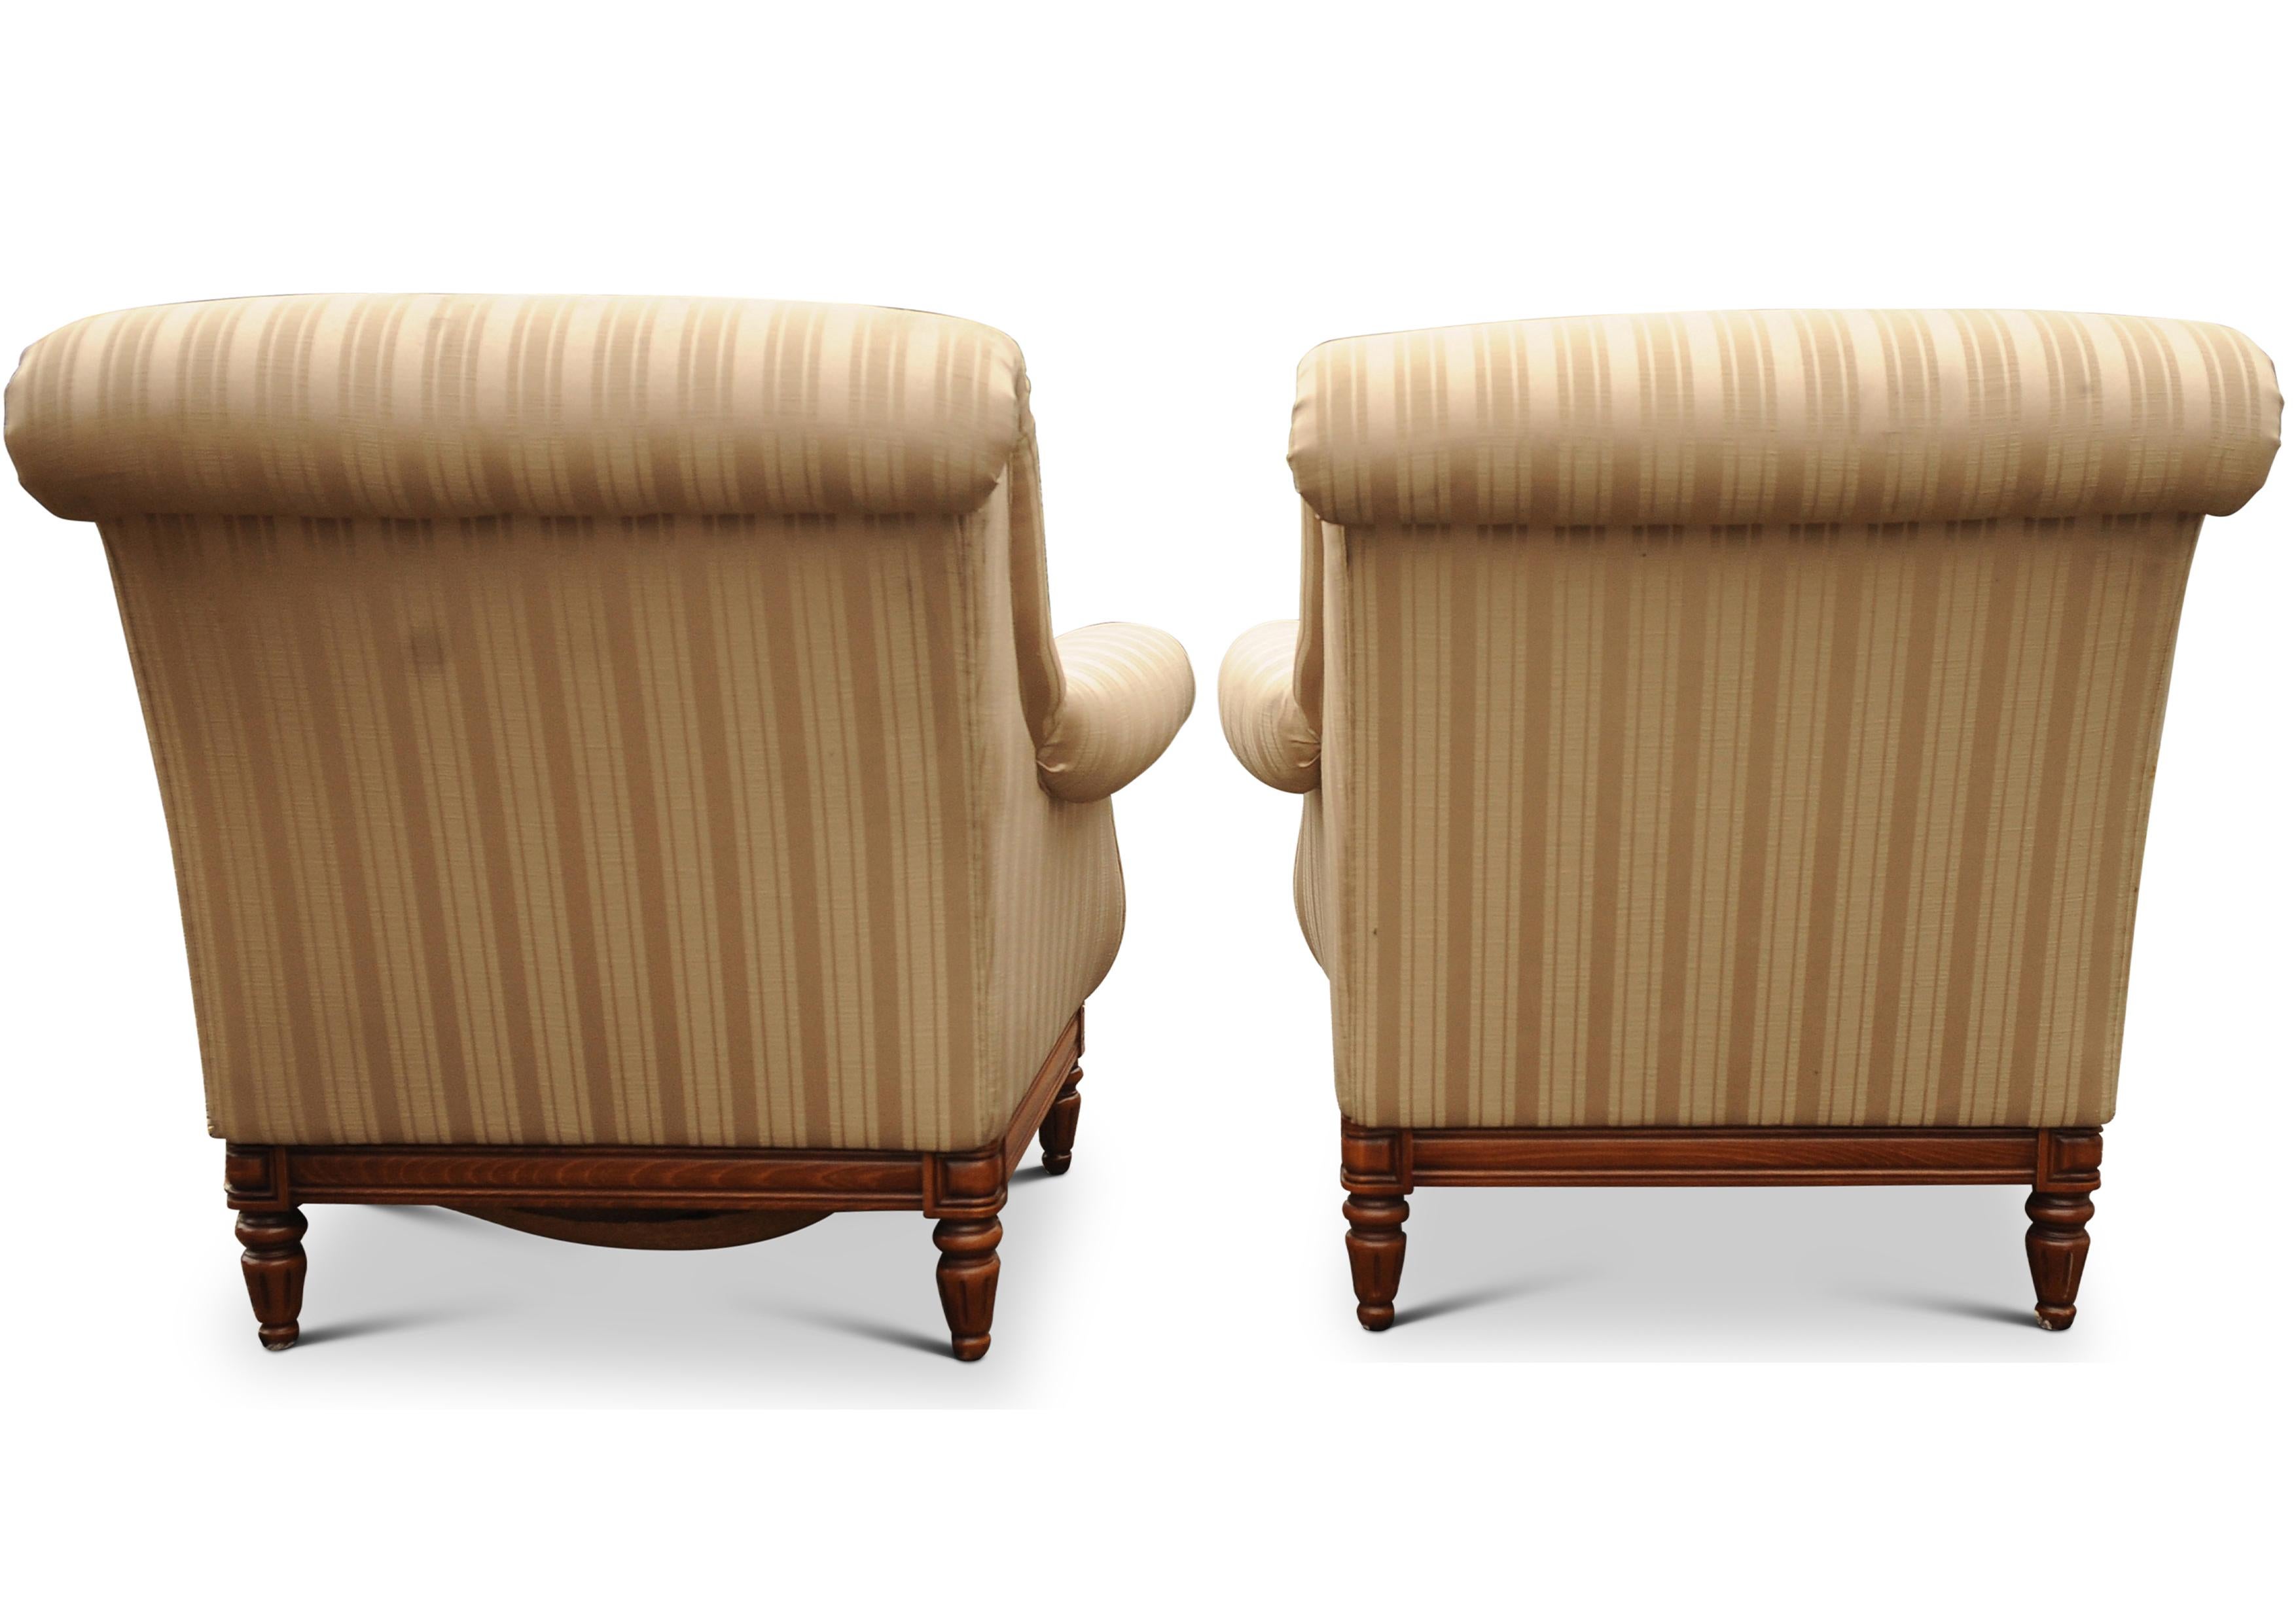 American Pair of William IV Empire Design Library Armchairs Striped Cream Silk Upholstery